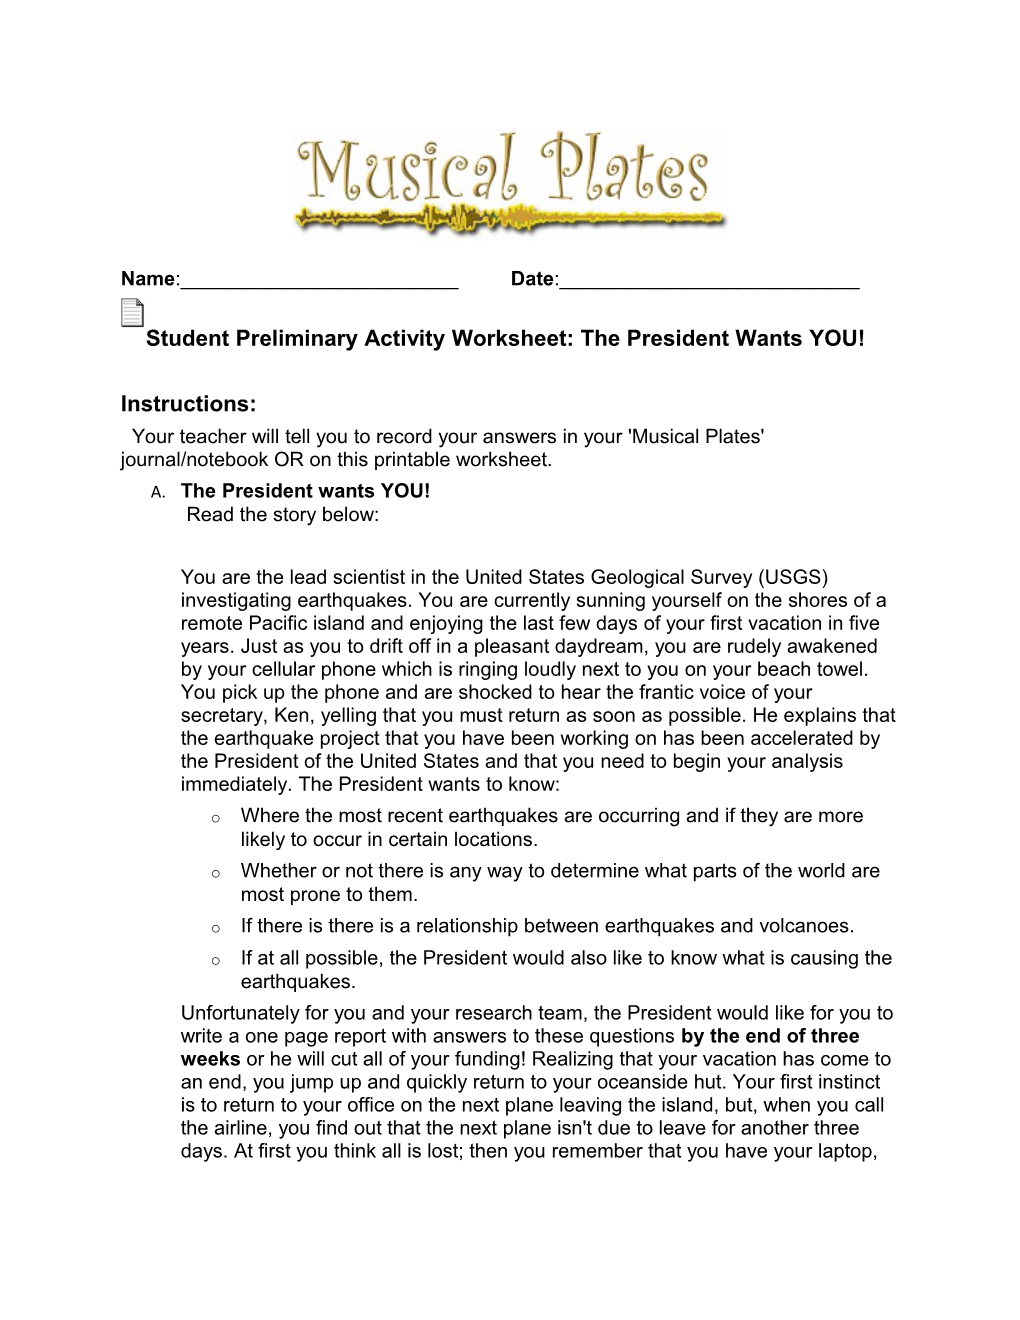 Student Preliminary Activity Worksheet: the President Wants YOU!